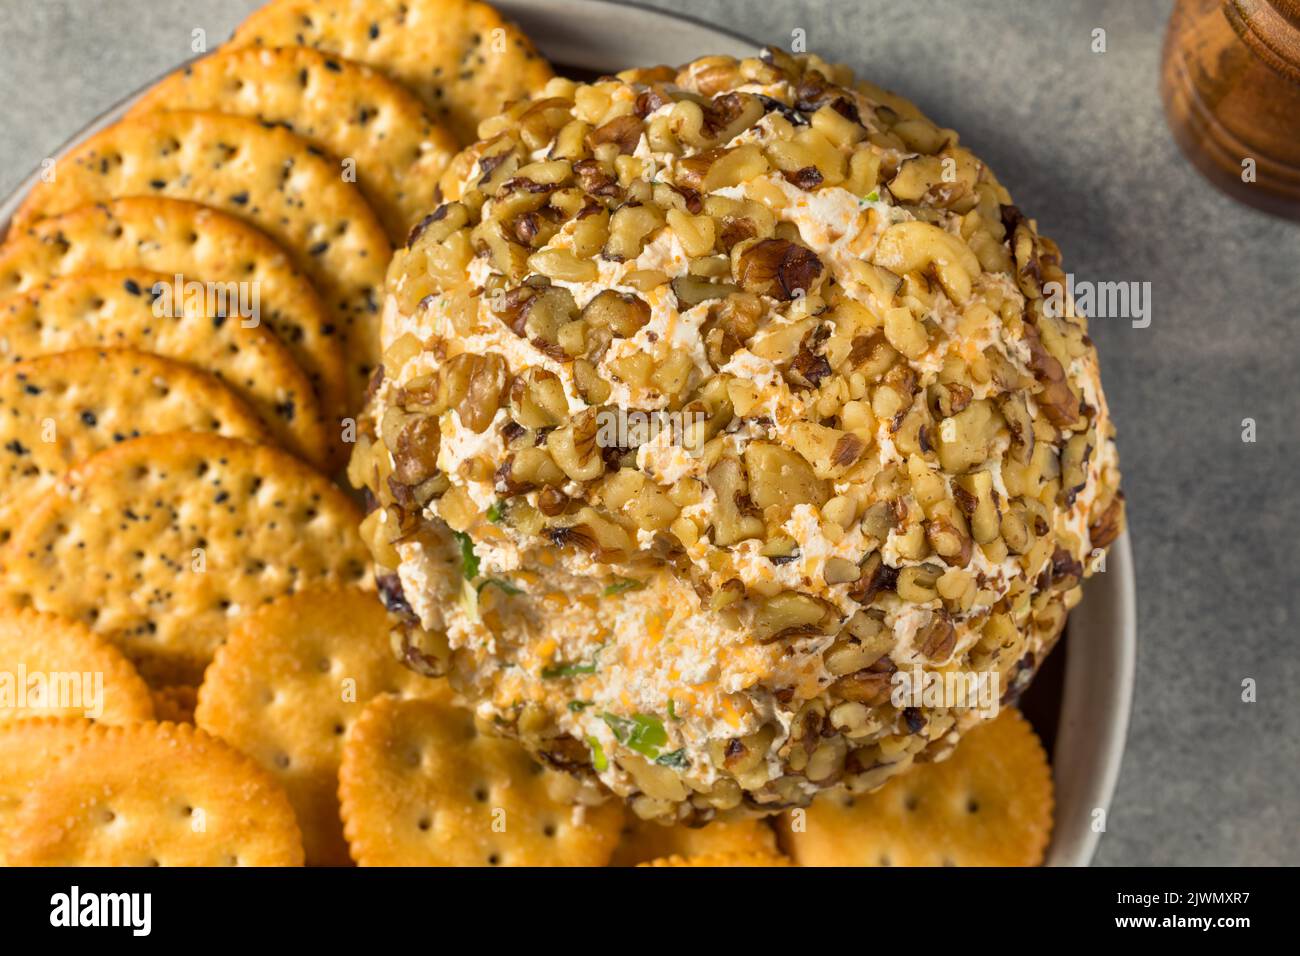 Homemade Creamy Cheese Ball Appetizer with Crackers Stock Photo